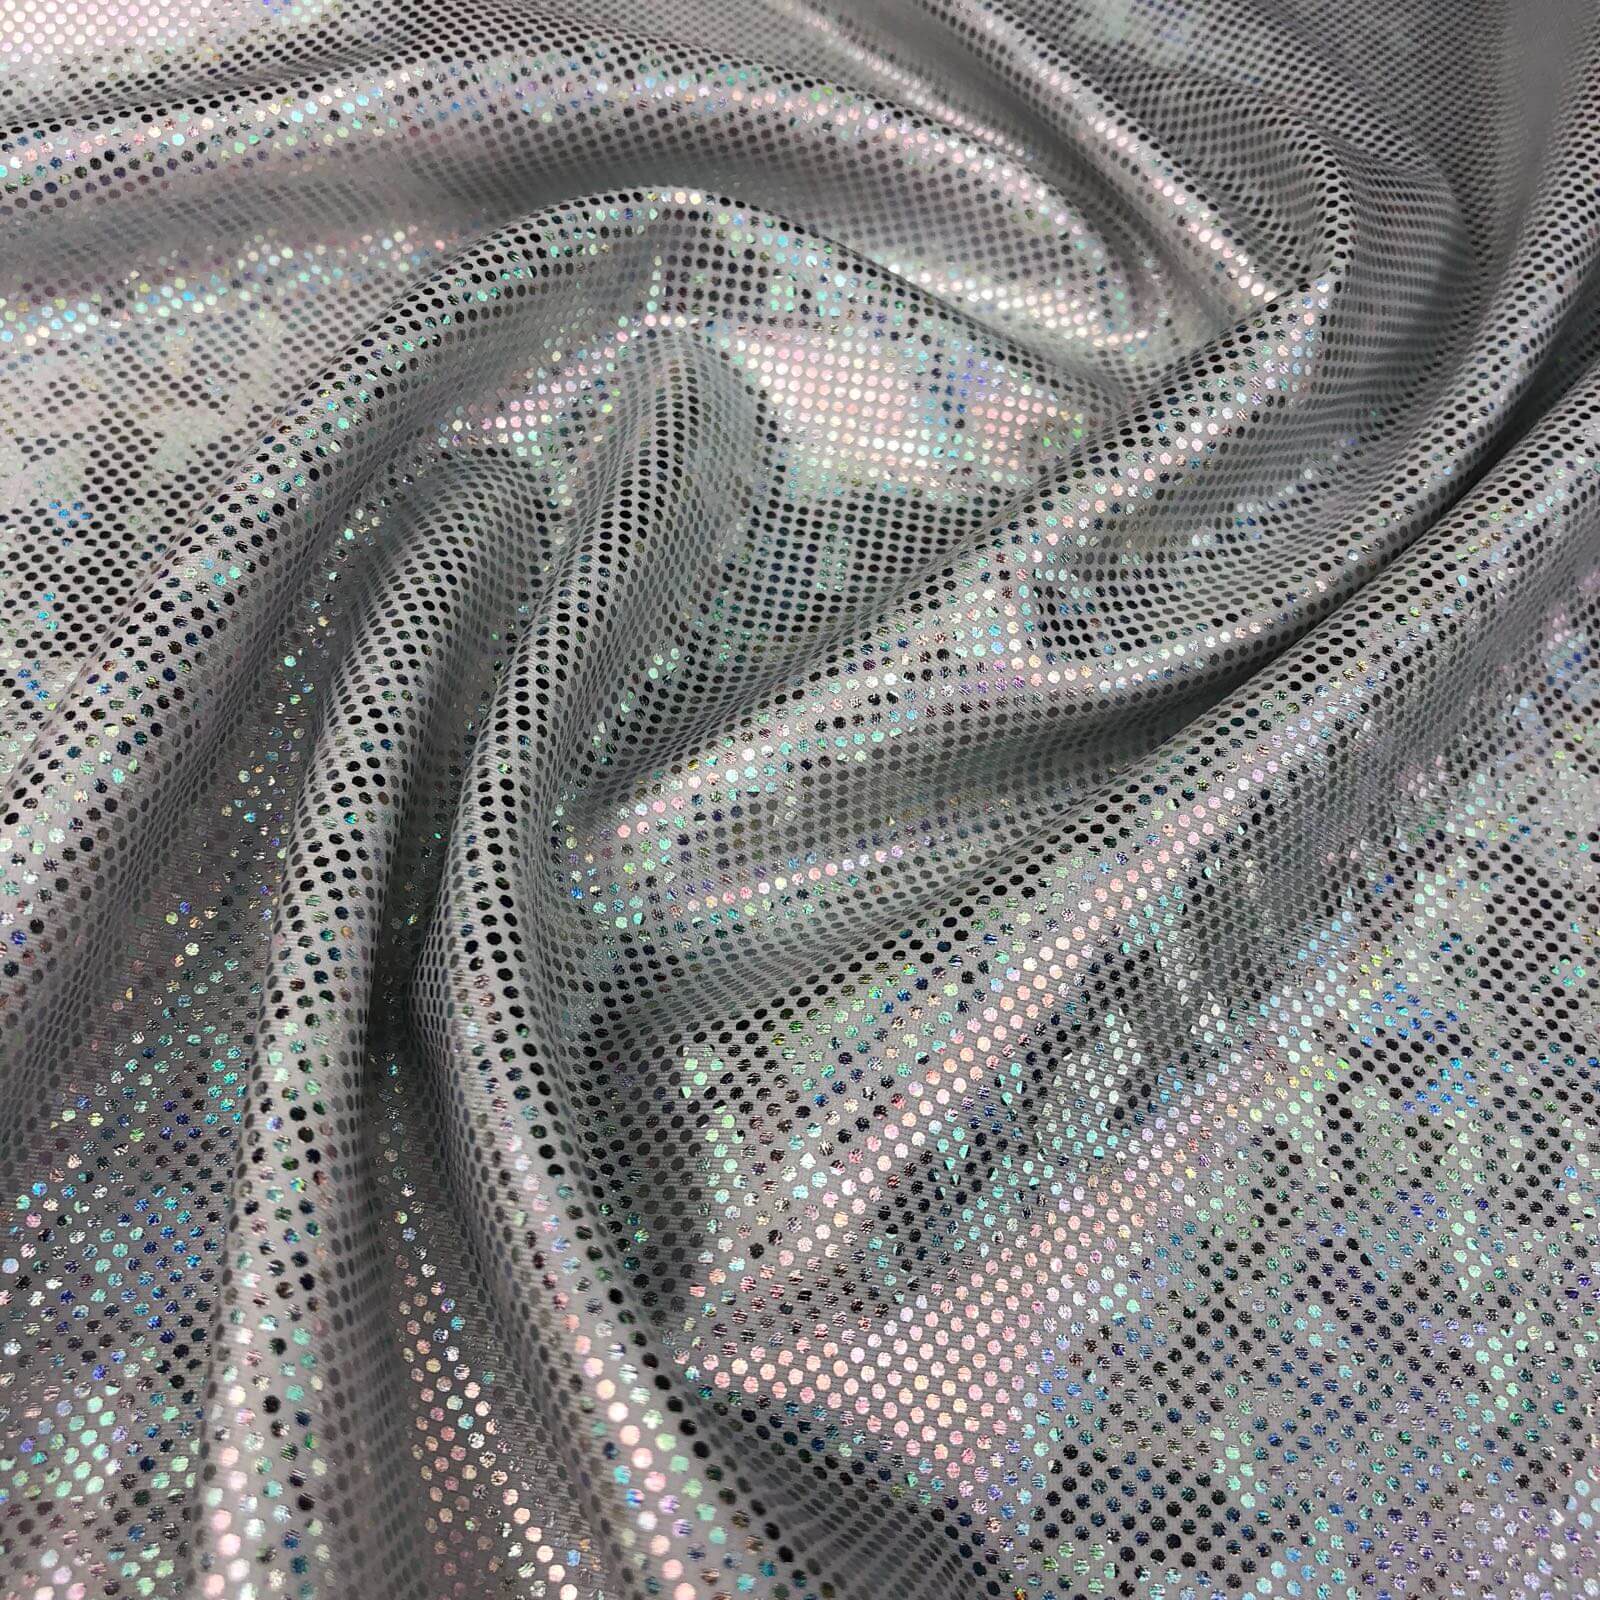  Steven_store 1yd pre Owned Hologram foil Print Fabric Good  Weight 4 Way Spandex Lycra J7066 - Fabric for Quilting, Sewing, Crafting,  Bedding : אמנות, יצירה ותפירה